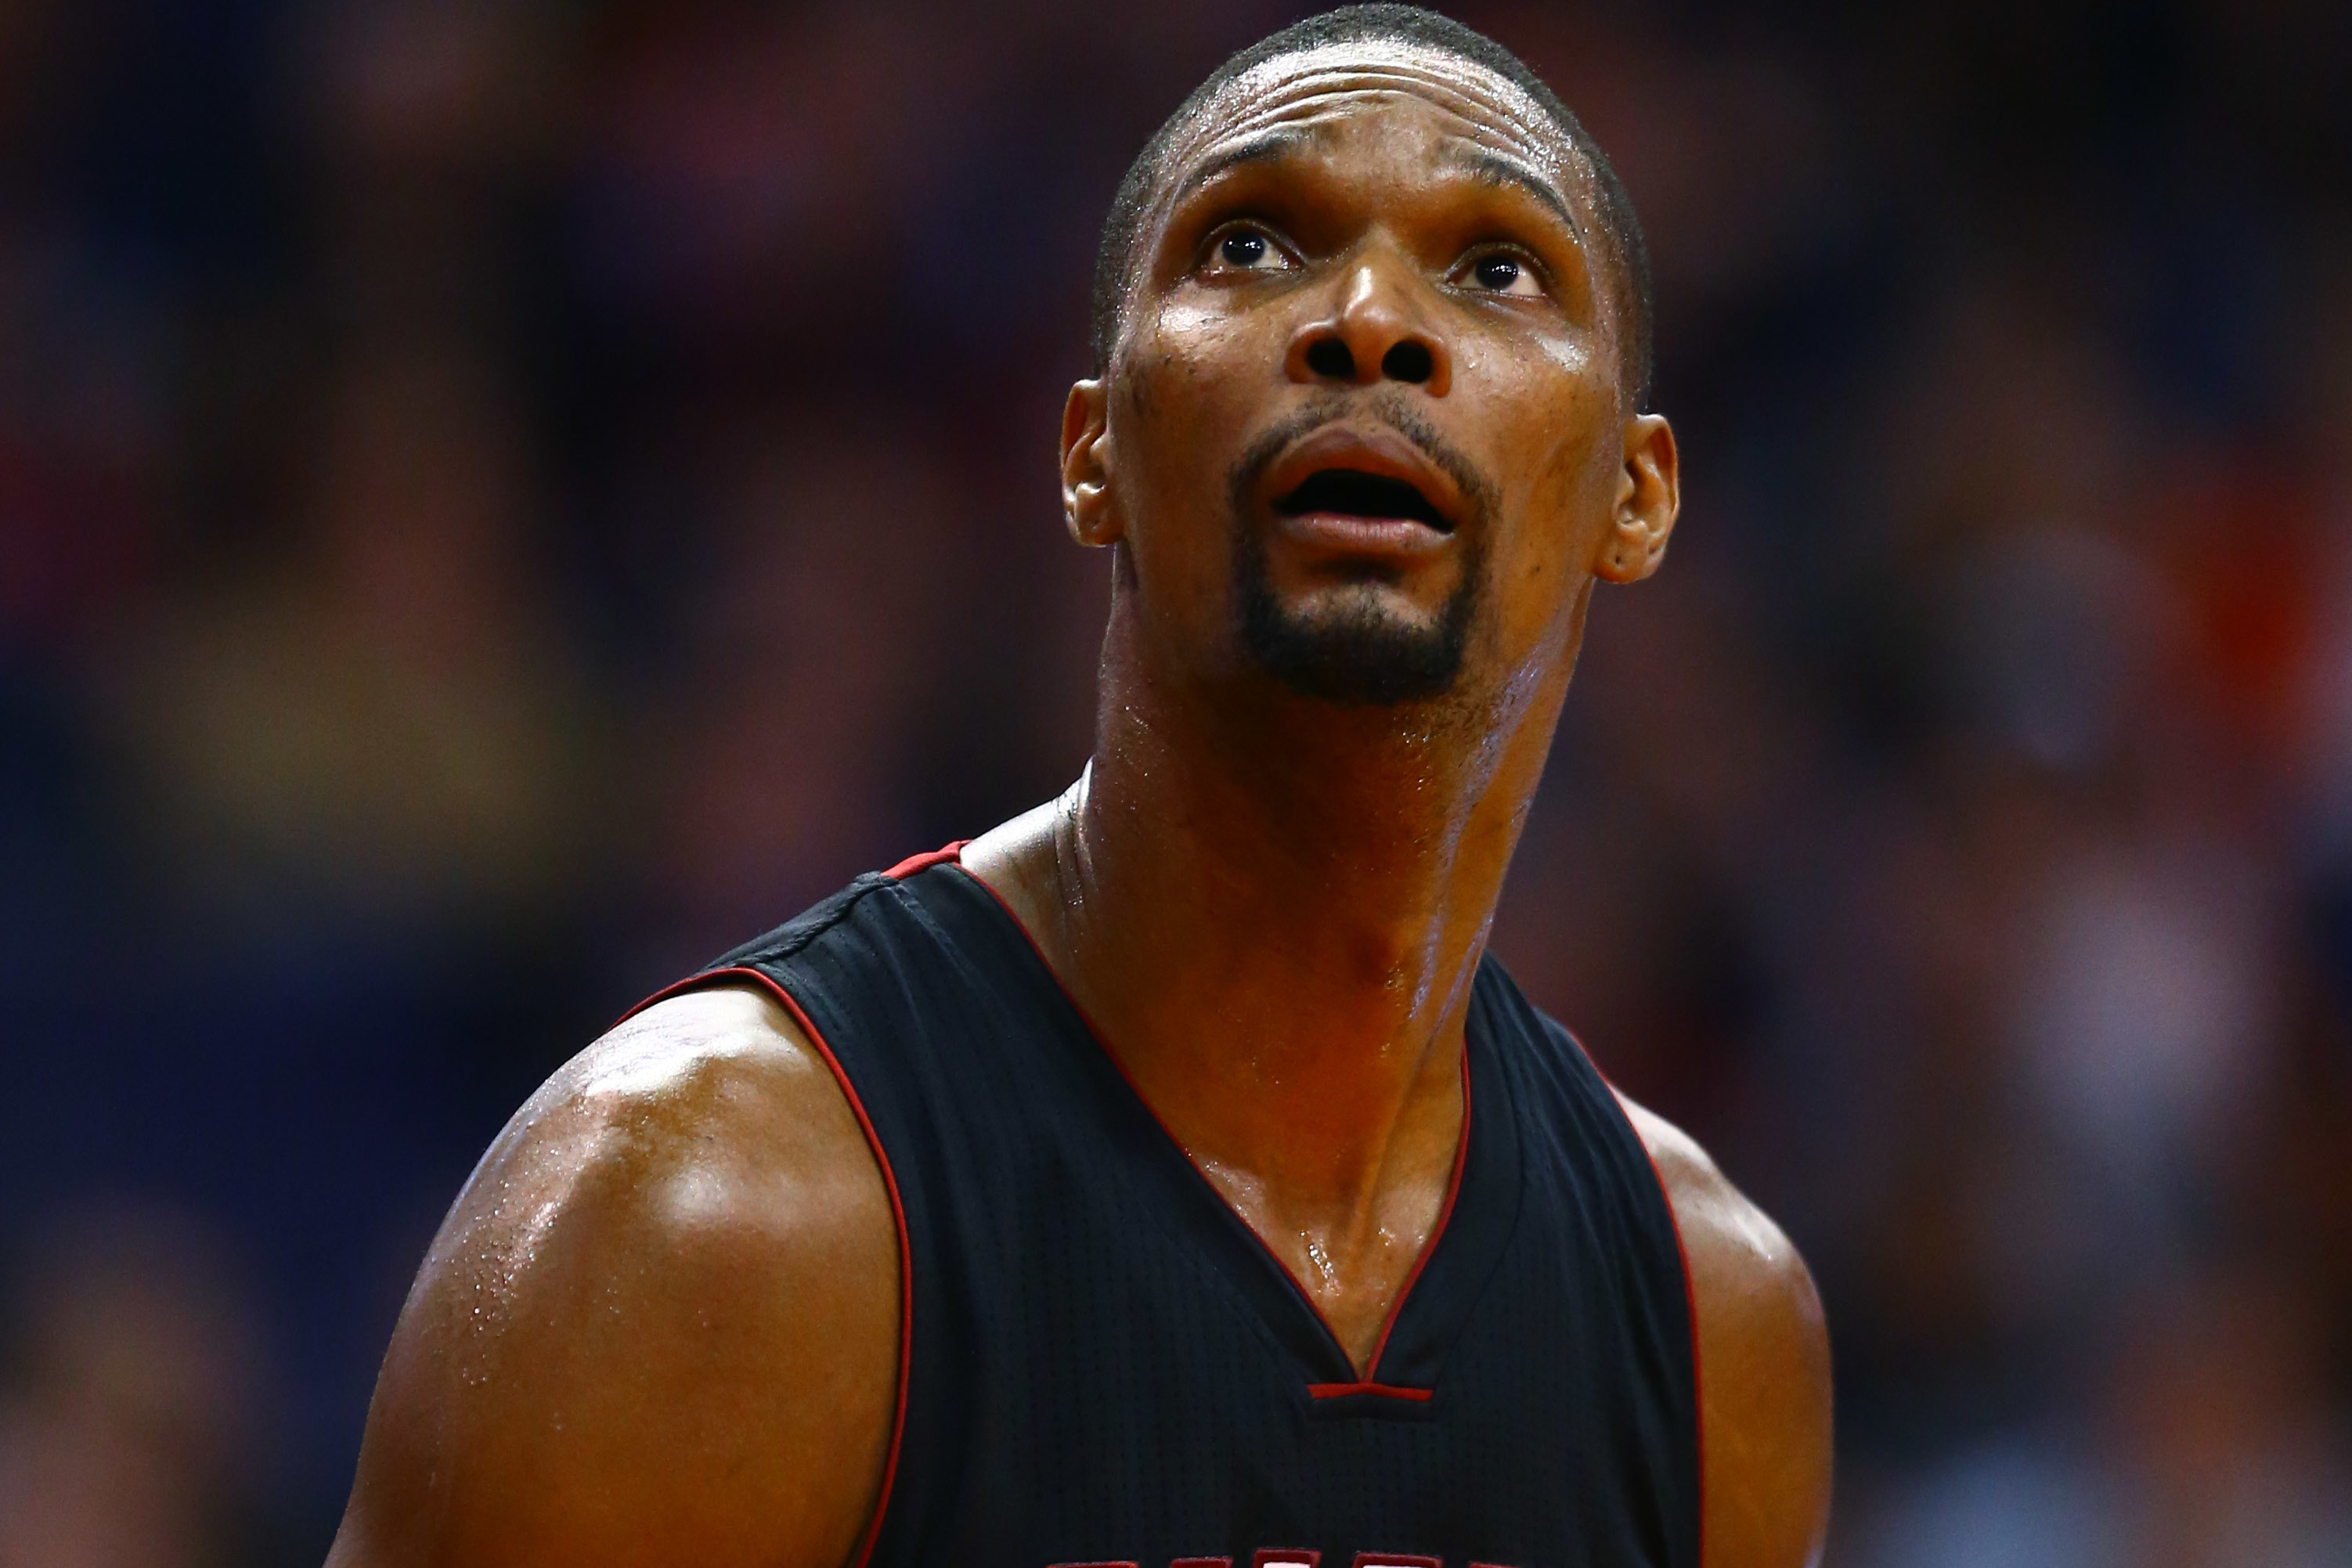 Chris Bosh pulls name from Olympic consideration - NBC Sports